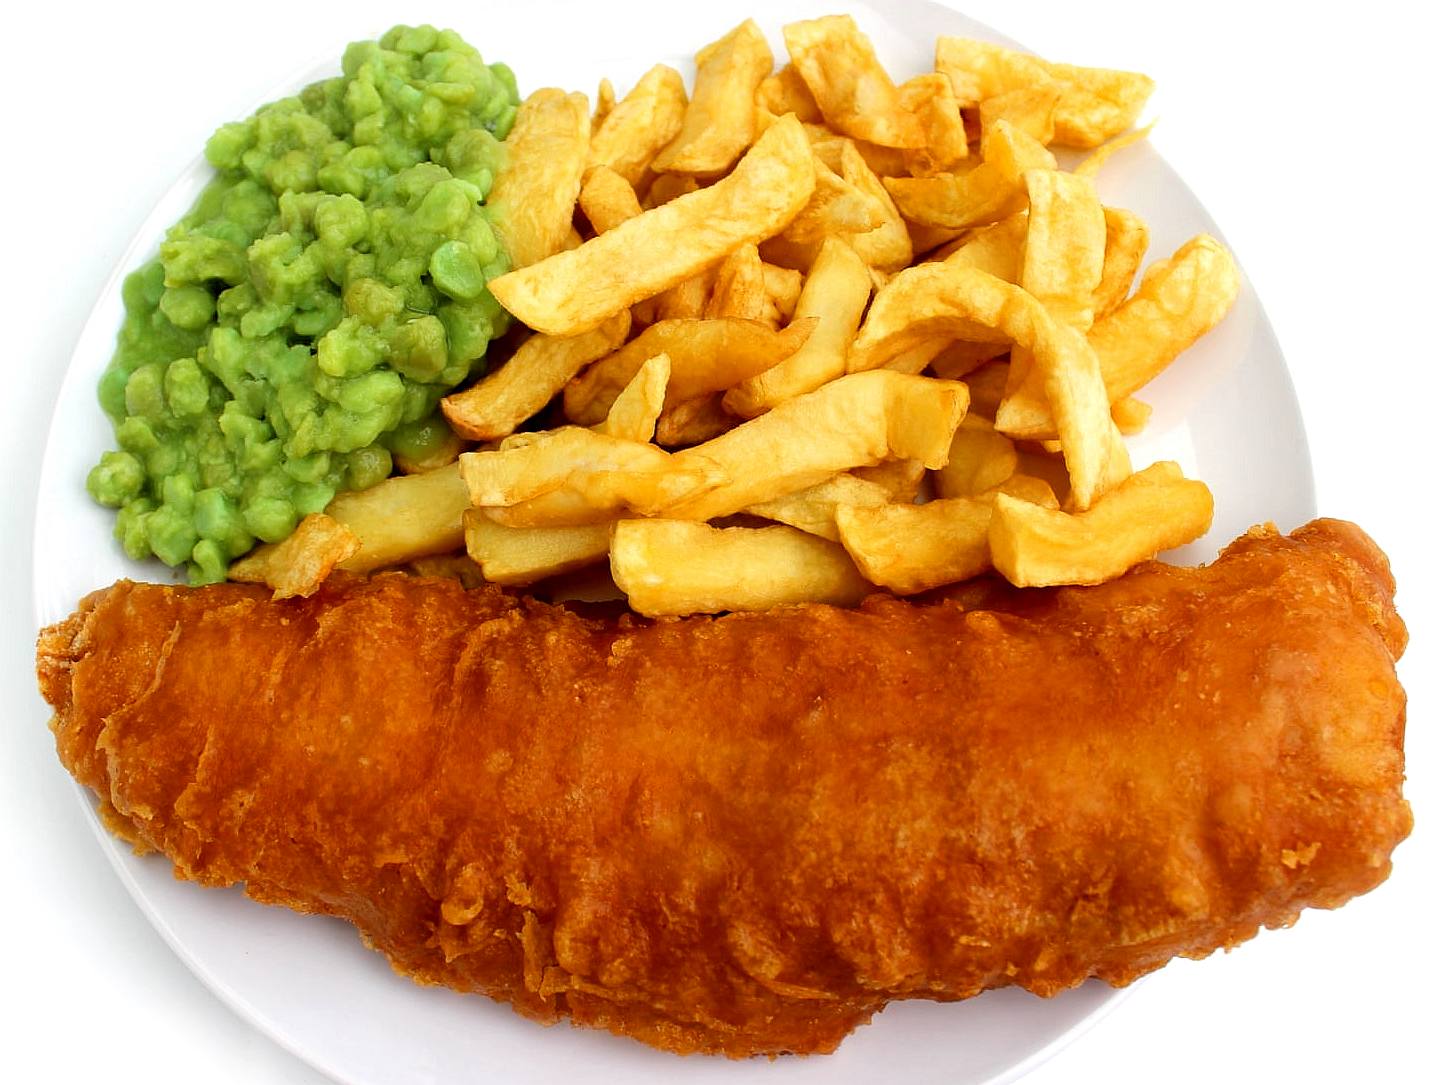 Cod and chips with plastic microfibers please